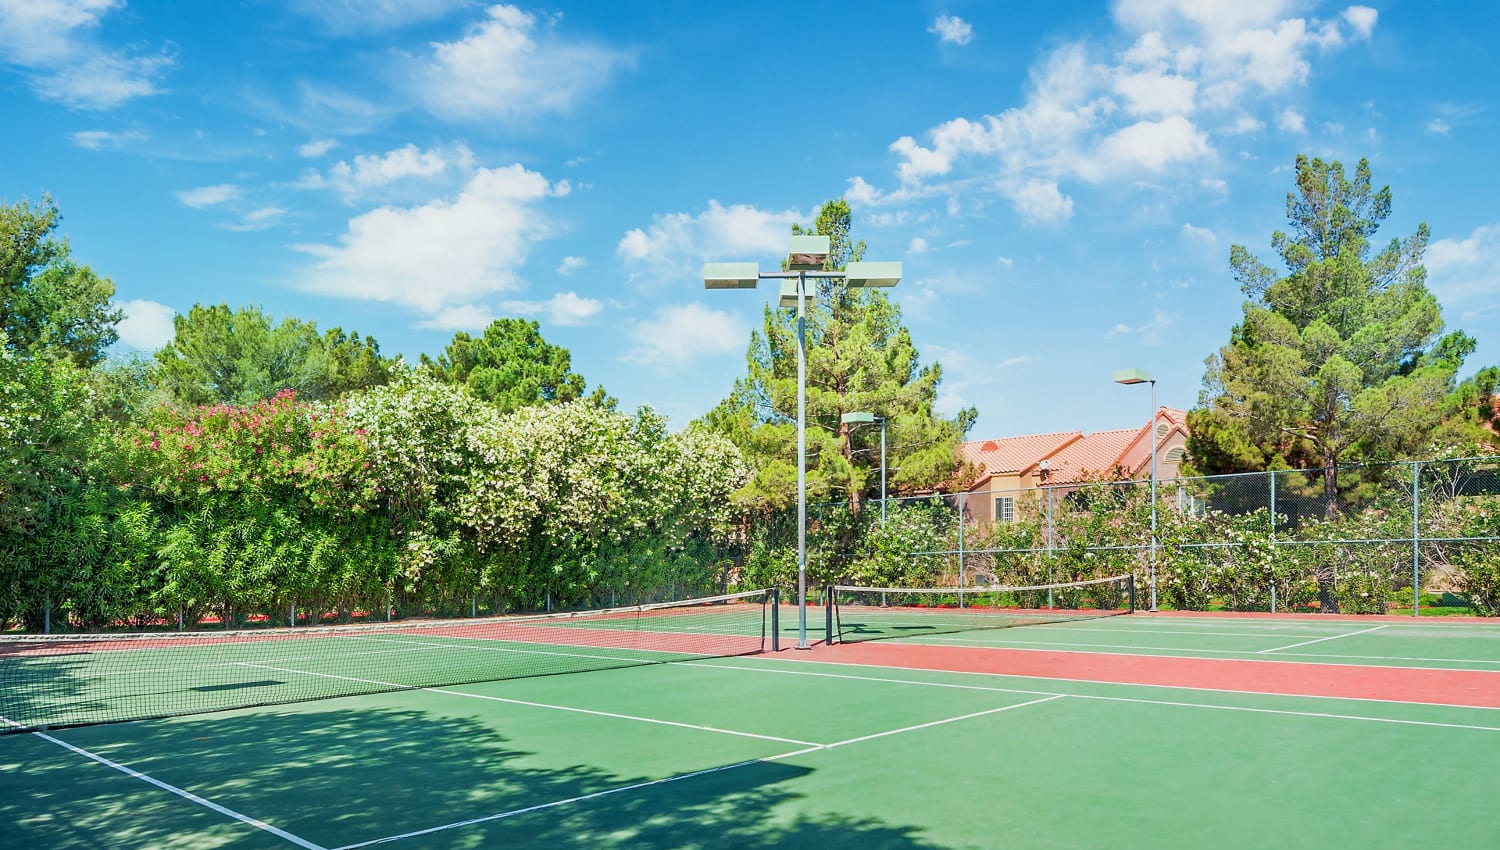 Tennis courts at Eagle Trace Apartments in Las Vegas, Nevada